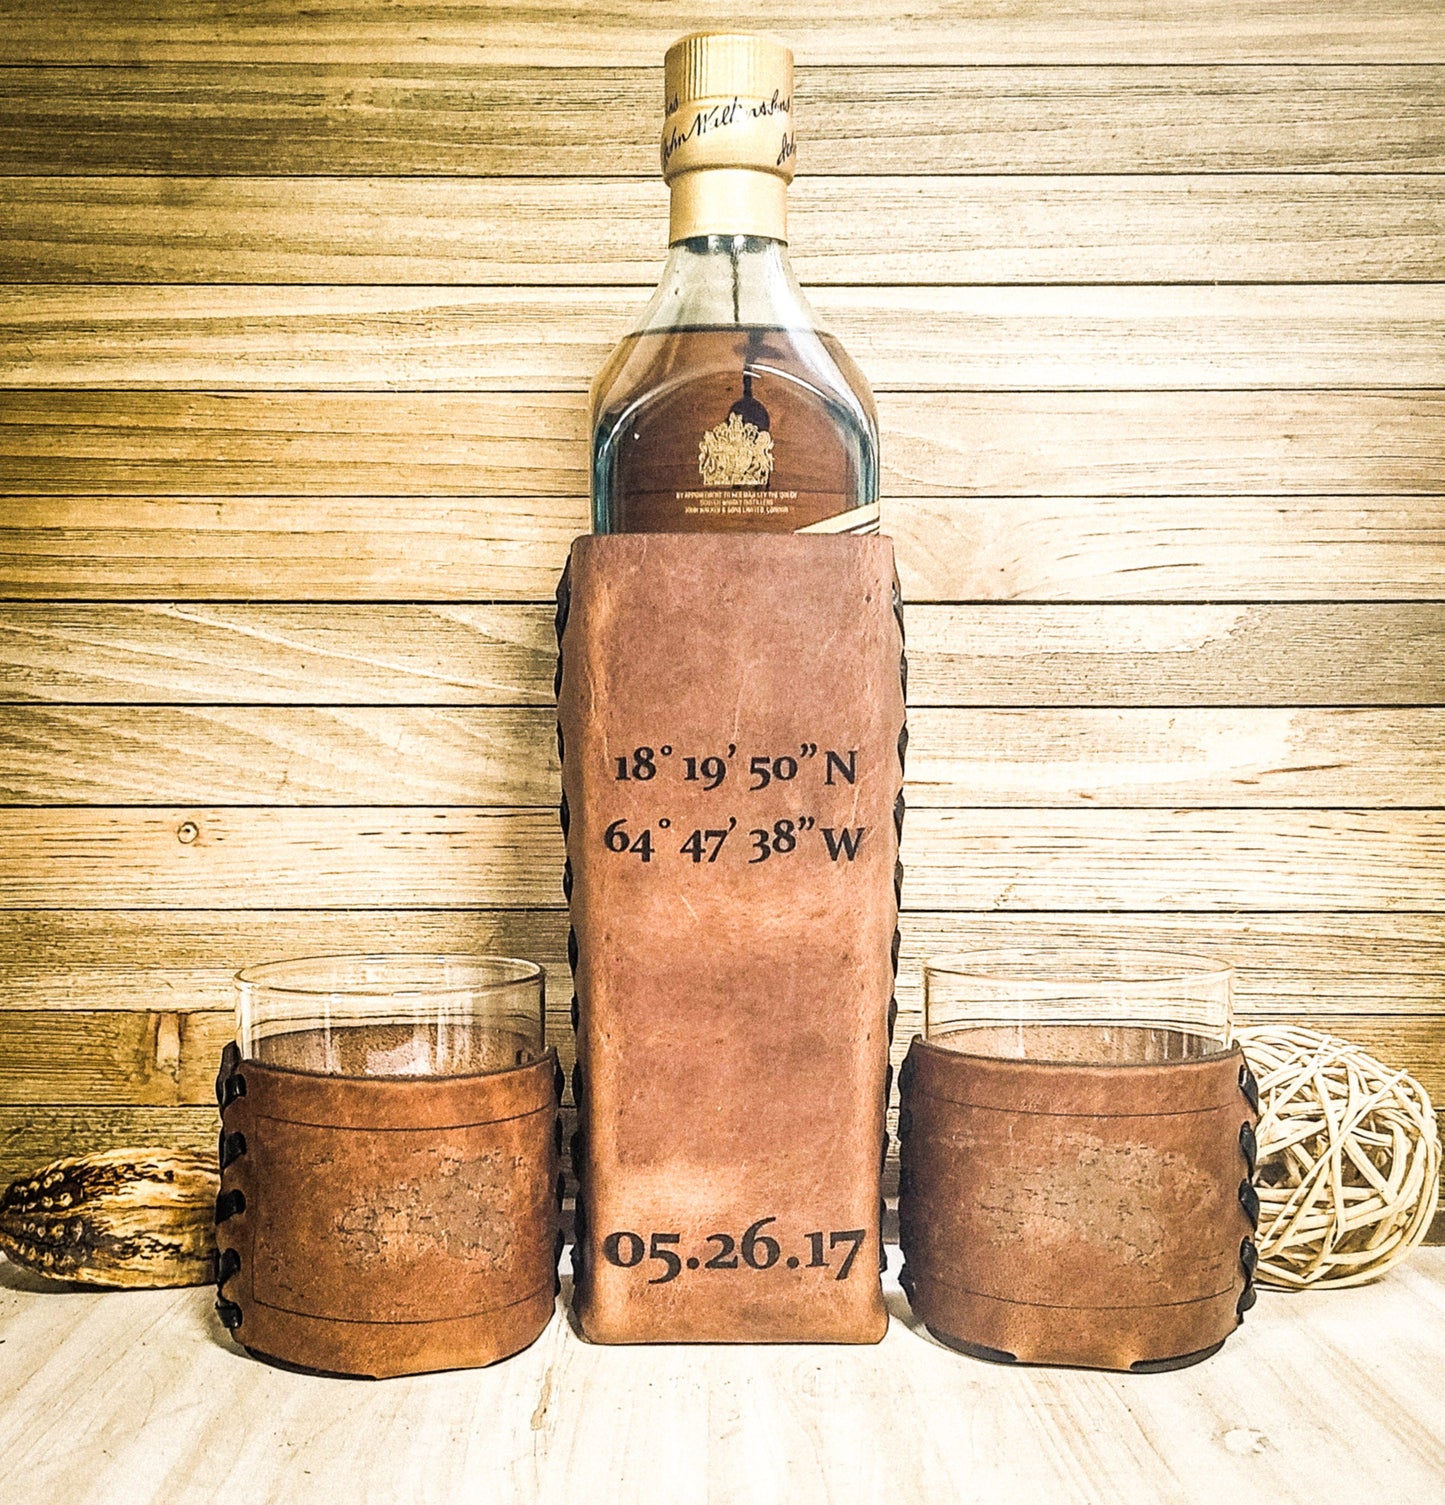 Leather whiskey set with leather wrapped whiskey glasses